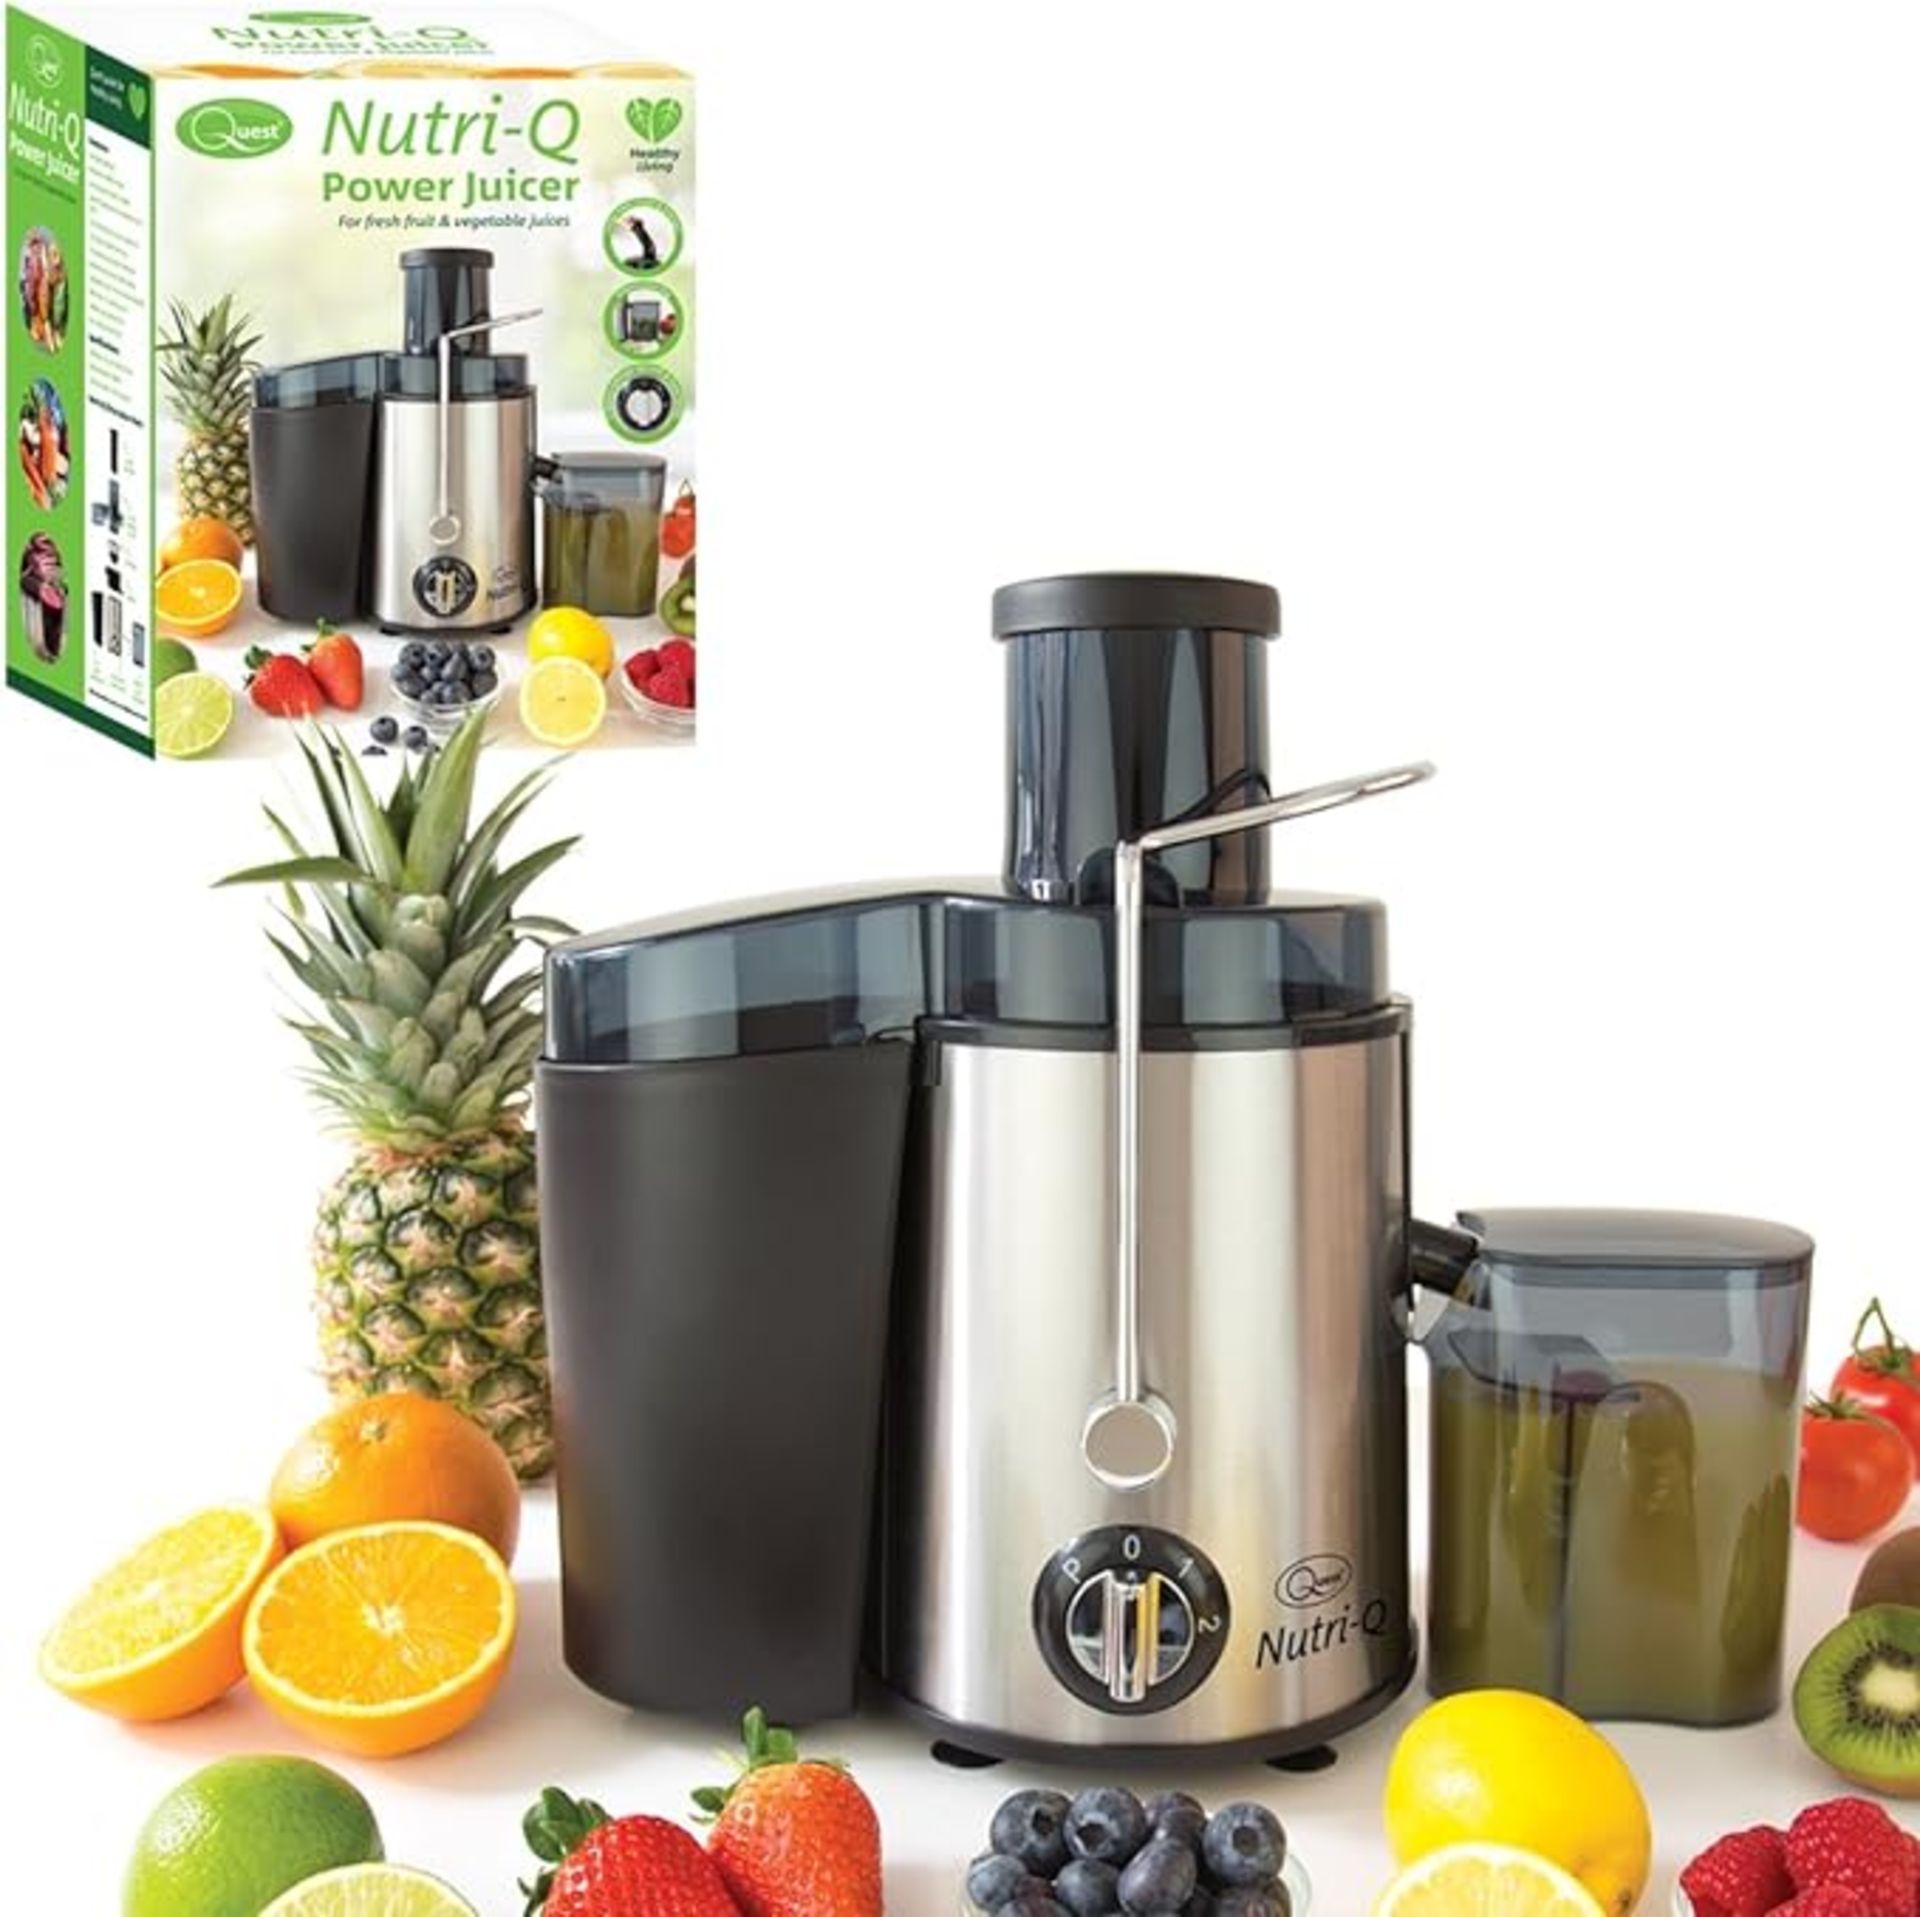 2 x Quest Nutri-Q 34730 Power Juicer With Centrifugal Extractor / 0.5L Jug & 1.5L Pulp Container /